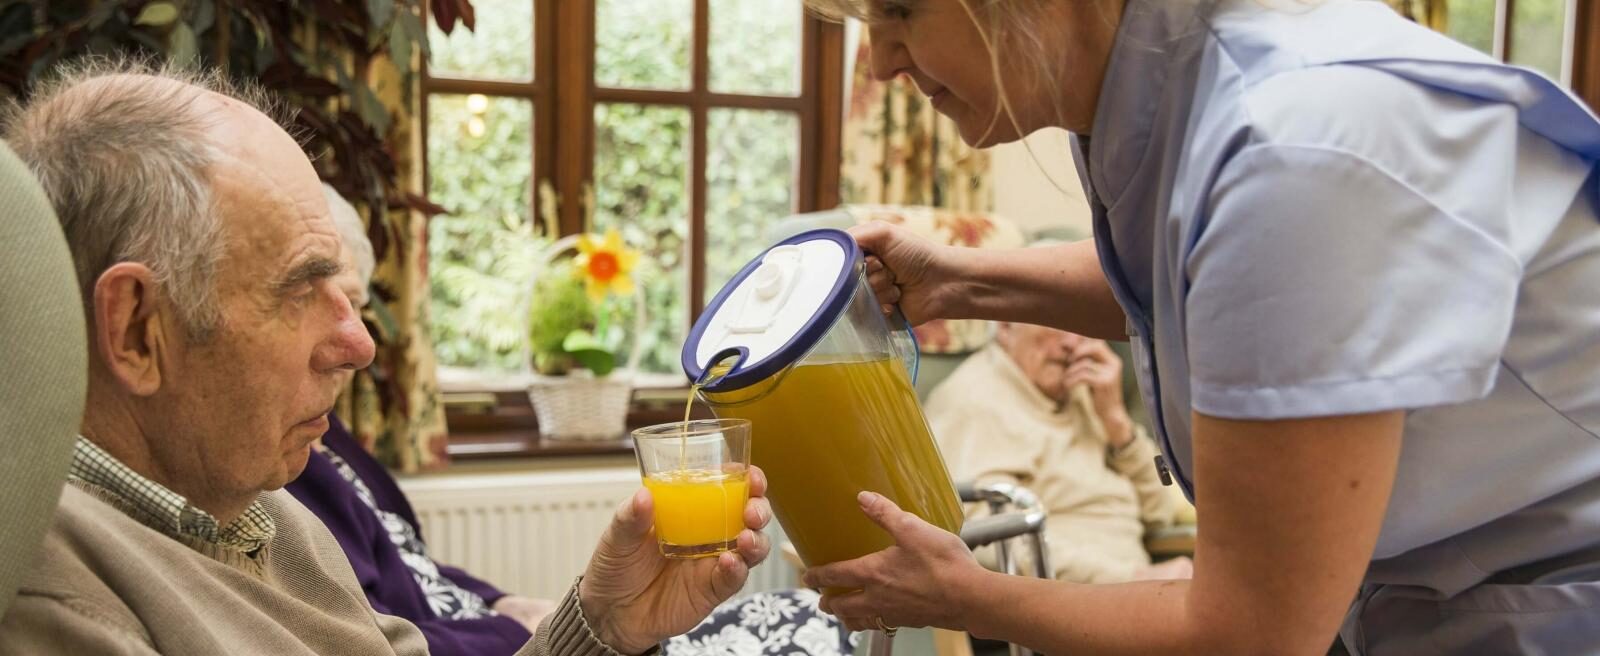 Juice Poured into Glass in Care Home Sector